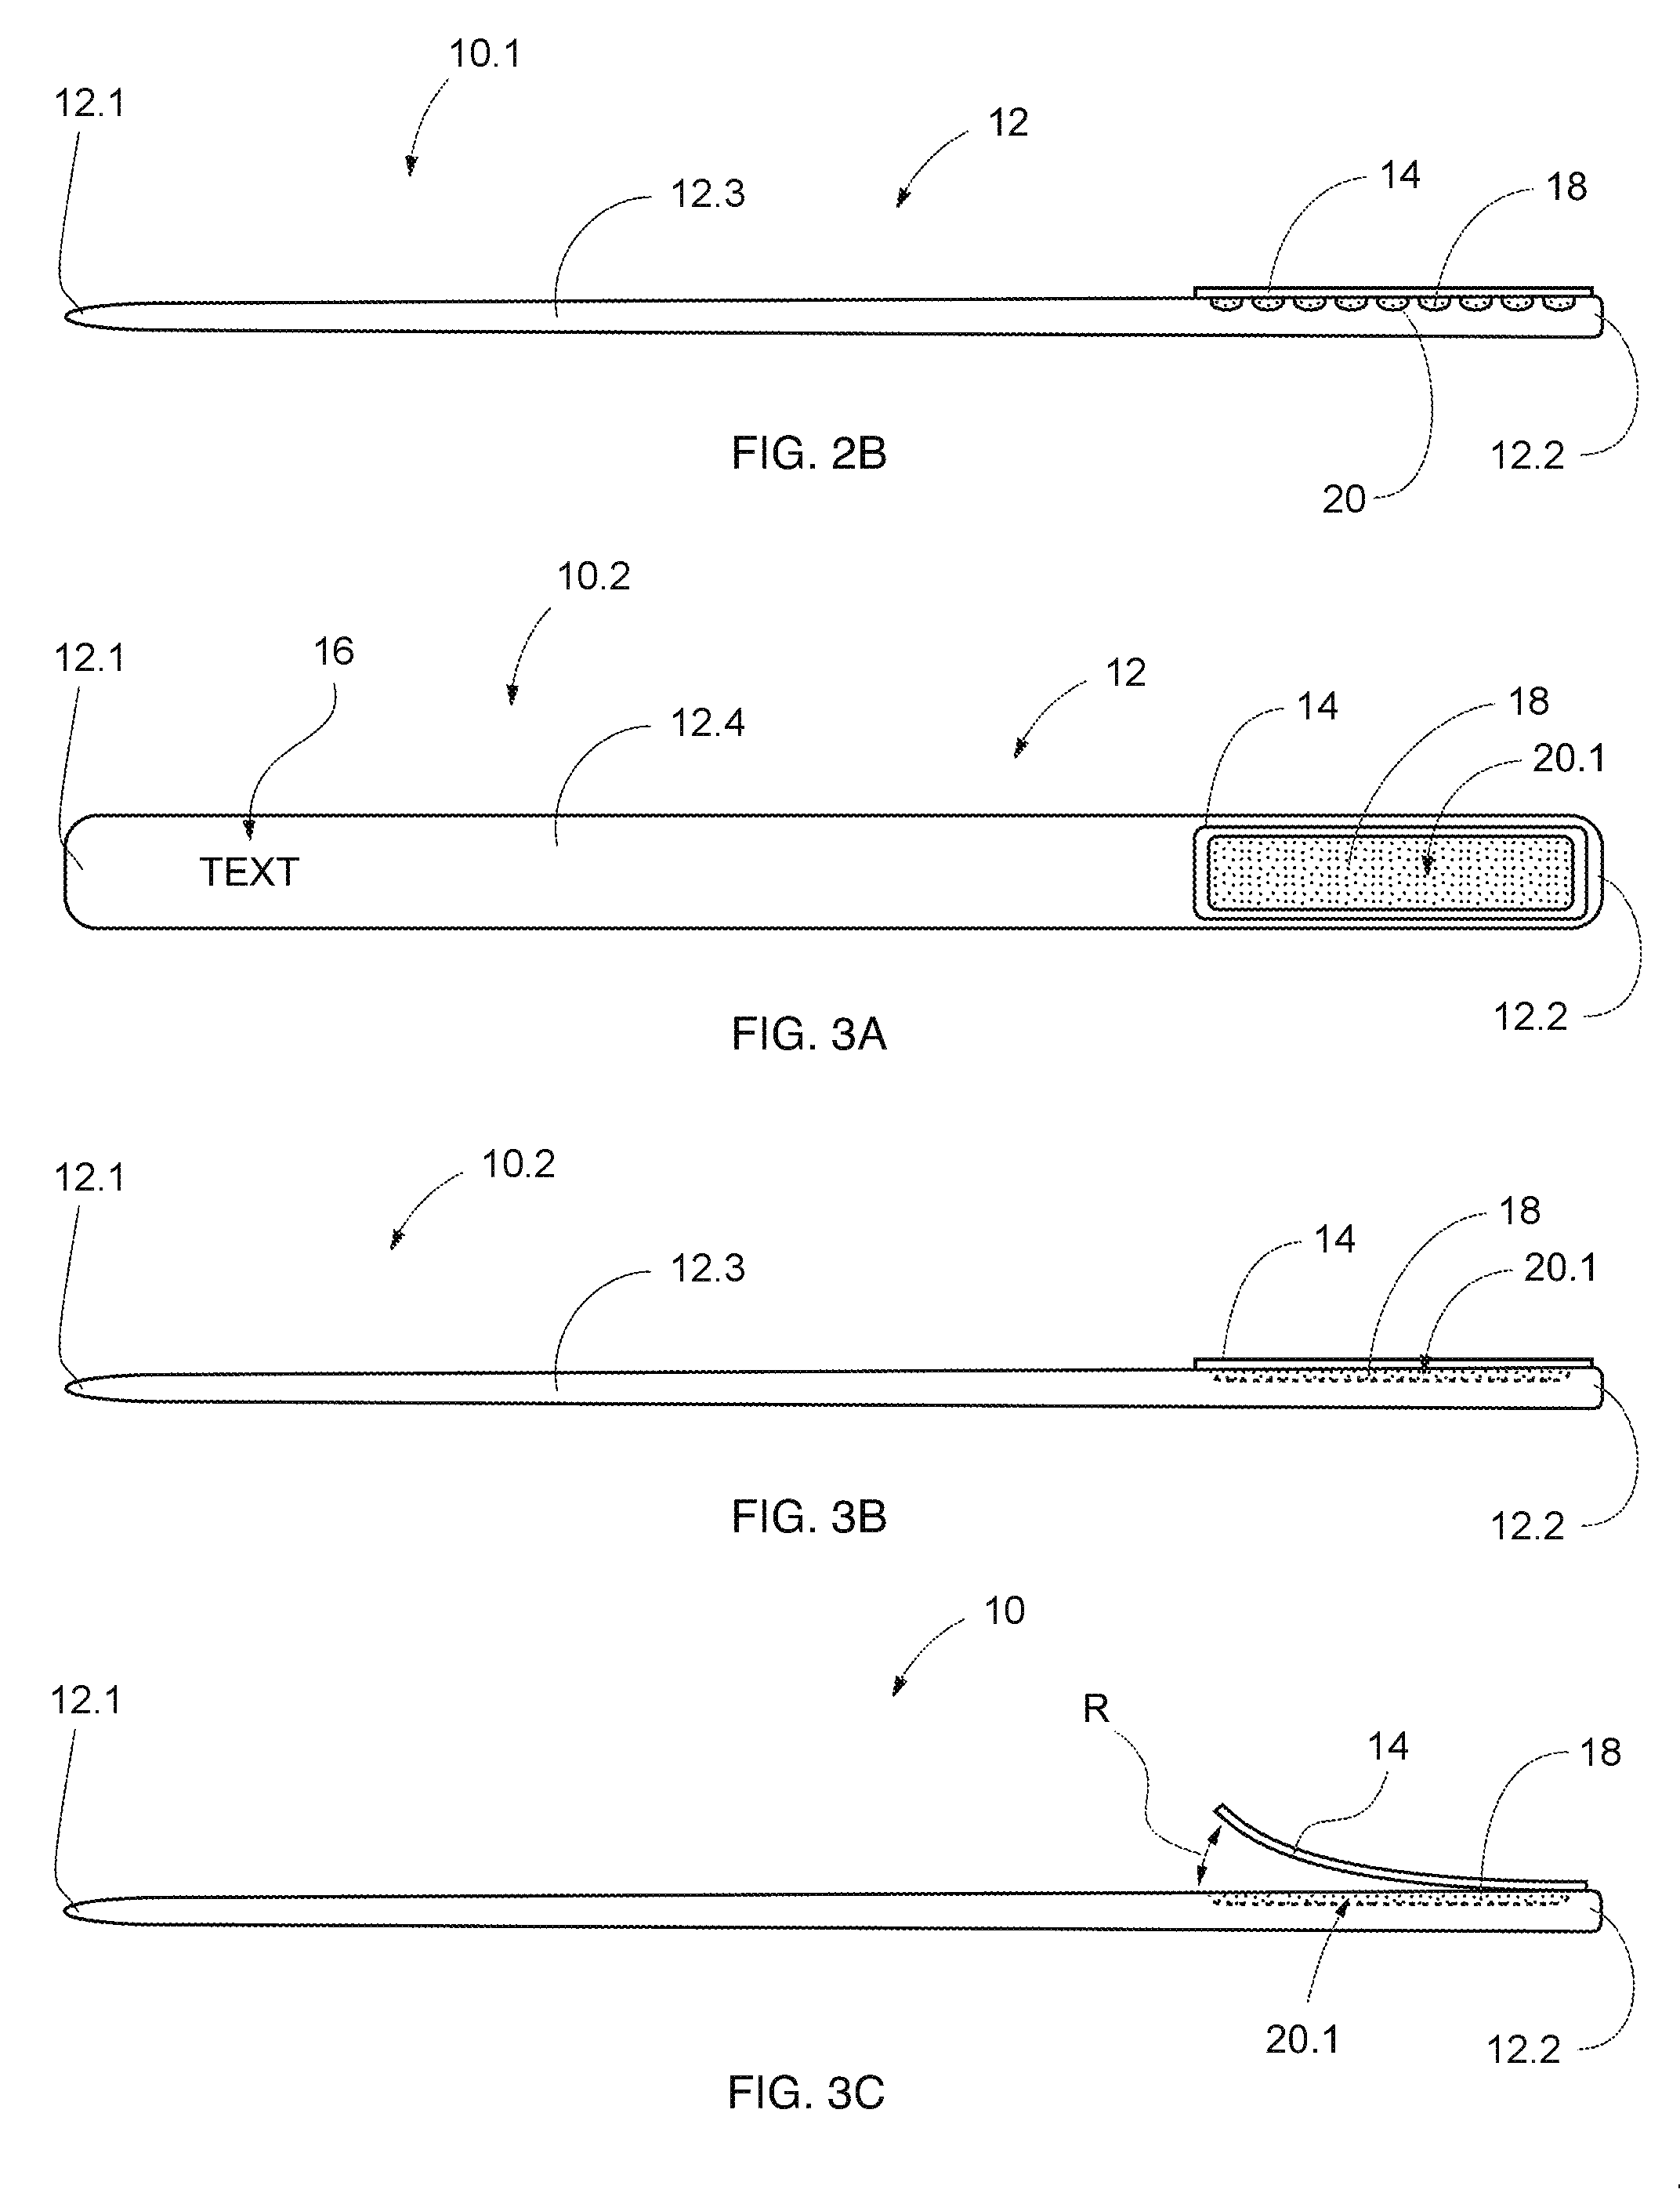 Drink sample apparatus and method of use